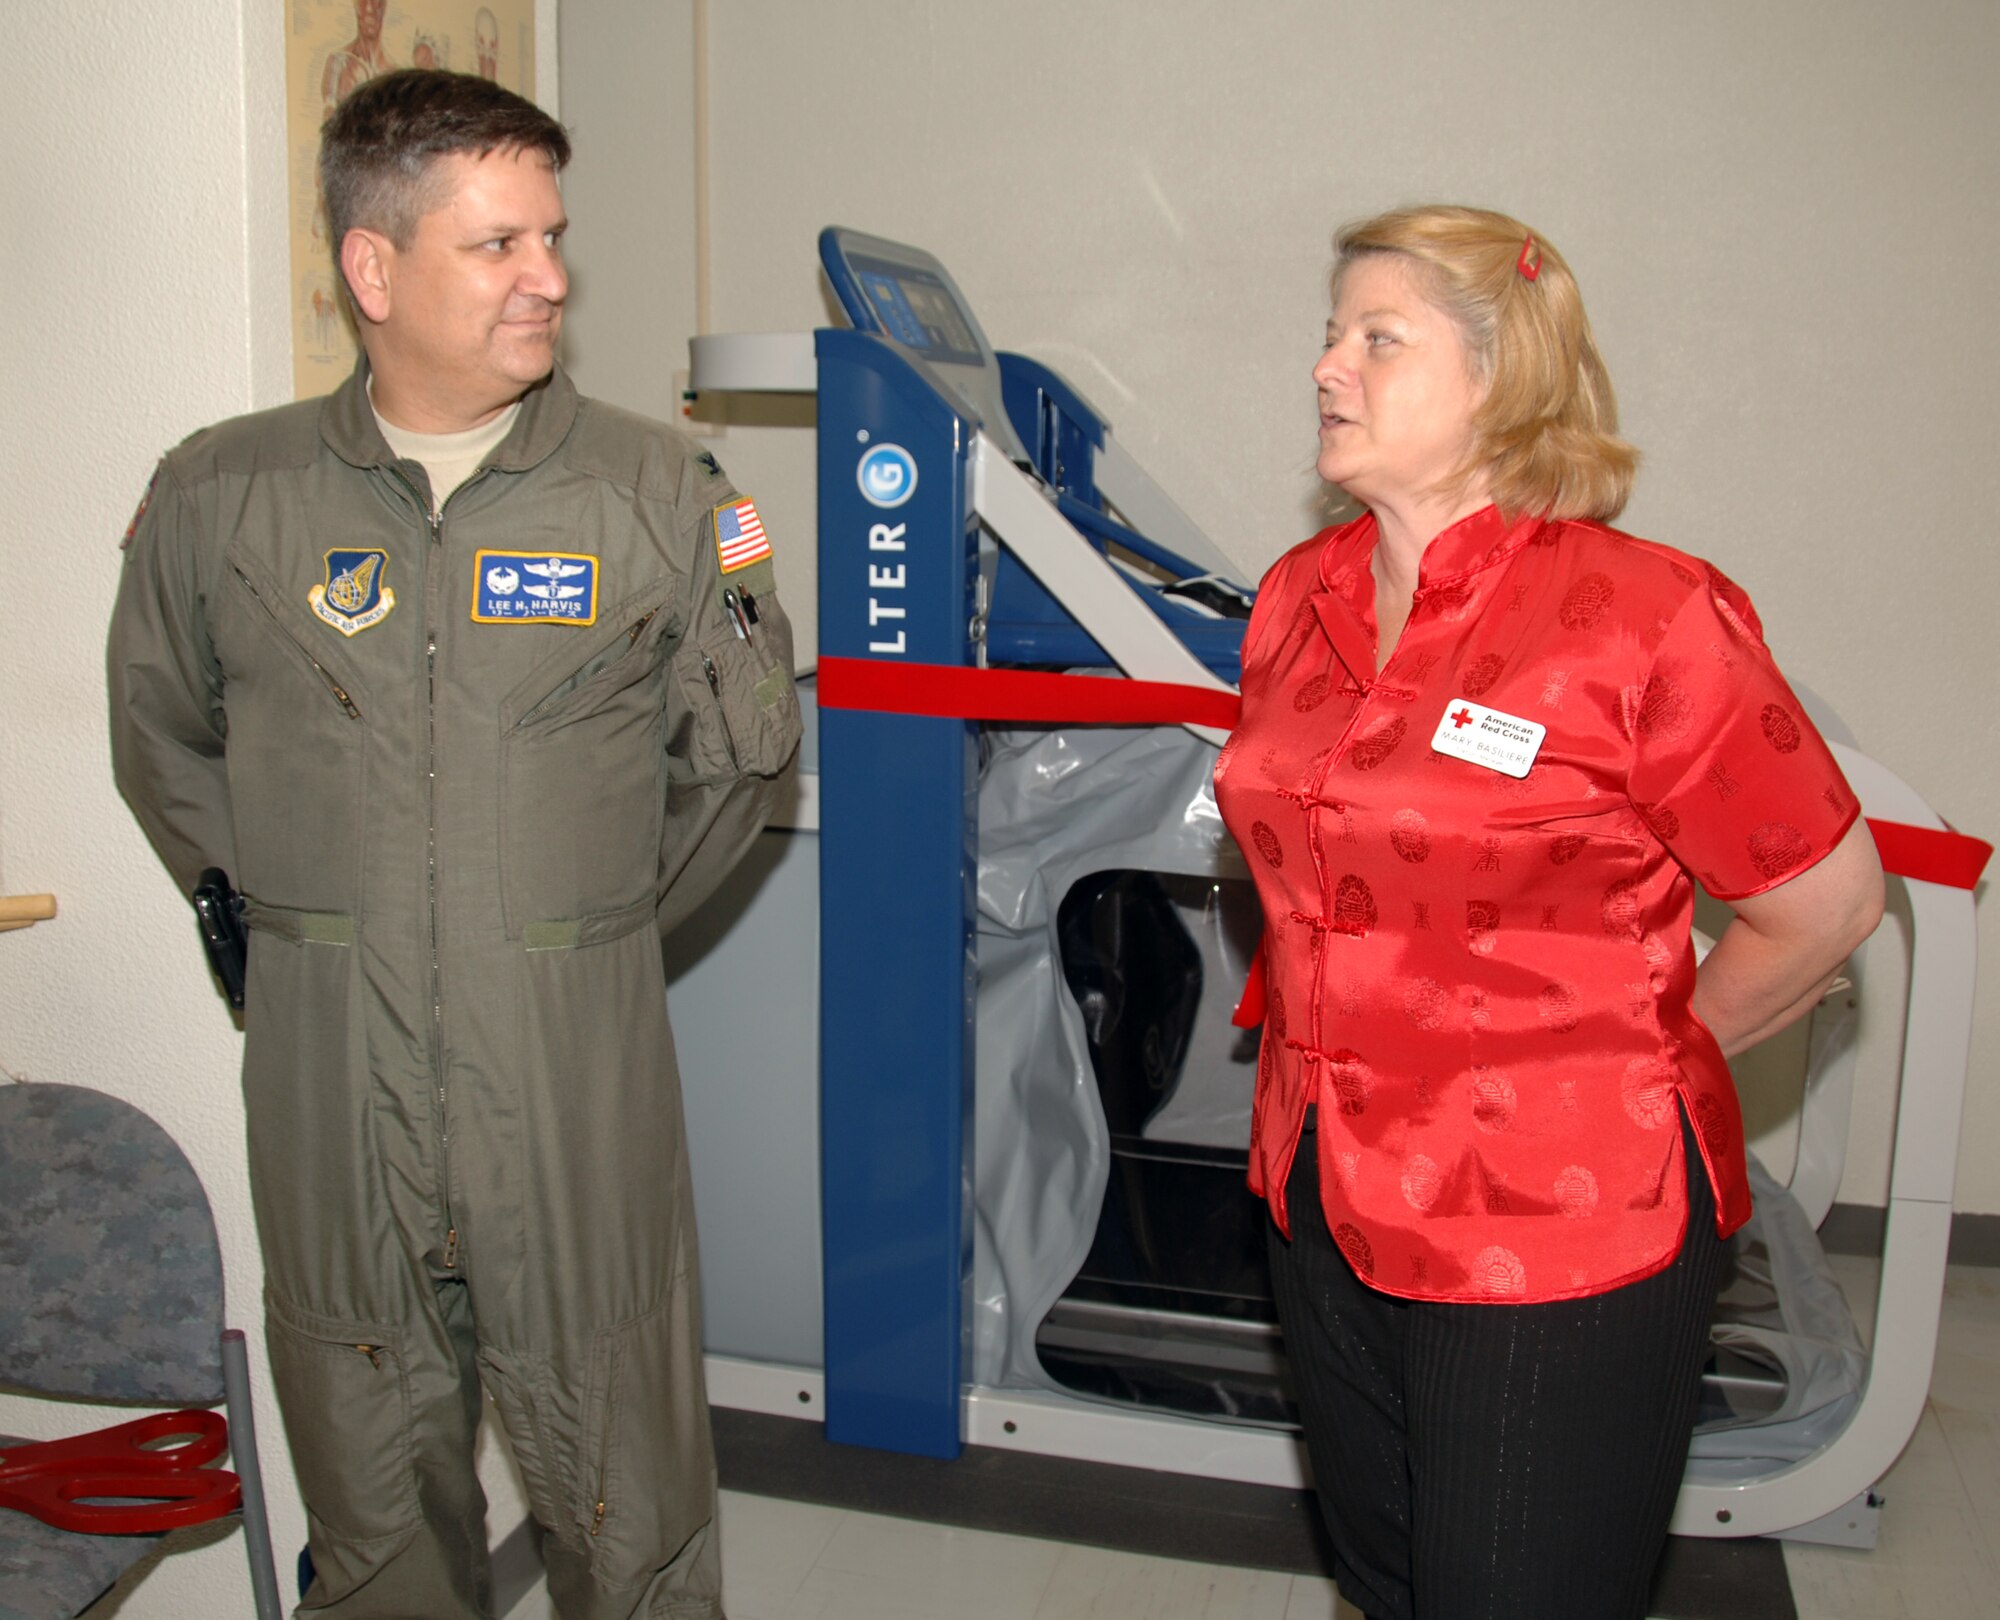 YOKOTA AIR BASE, Japan - Col. Lee Harvis, 374th Medical Group commander (left), and Mary Basiliere, American Red Cross senior station manager, explain the importance of the newest addition to the physical therapy department during a ribbon cutting ceremony held at the physical therapy clinic Yokota Air Base, Japan May 11, 2011. The AlterG Zero-Gravity Treadmill will help patients recover in rehabilitation following injury or surgery of the lower extremities. (U.S. Air Force Photo/Airman 1st Class Katrina R. Menchaca)